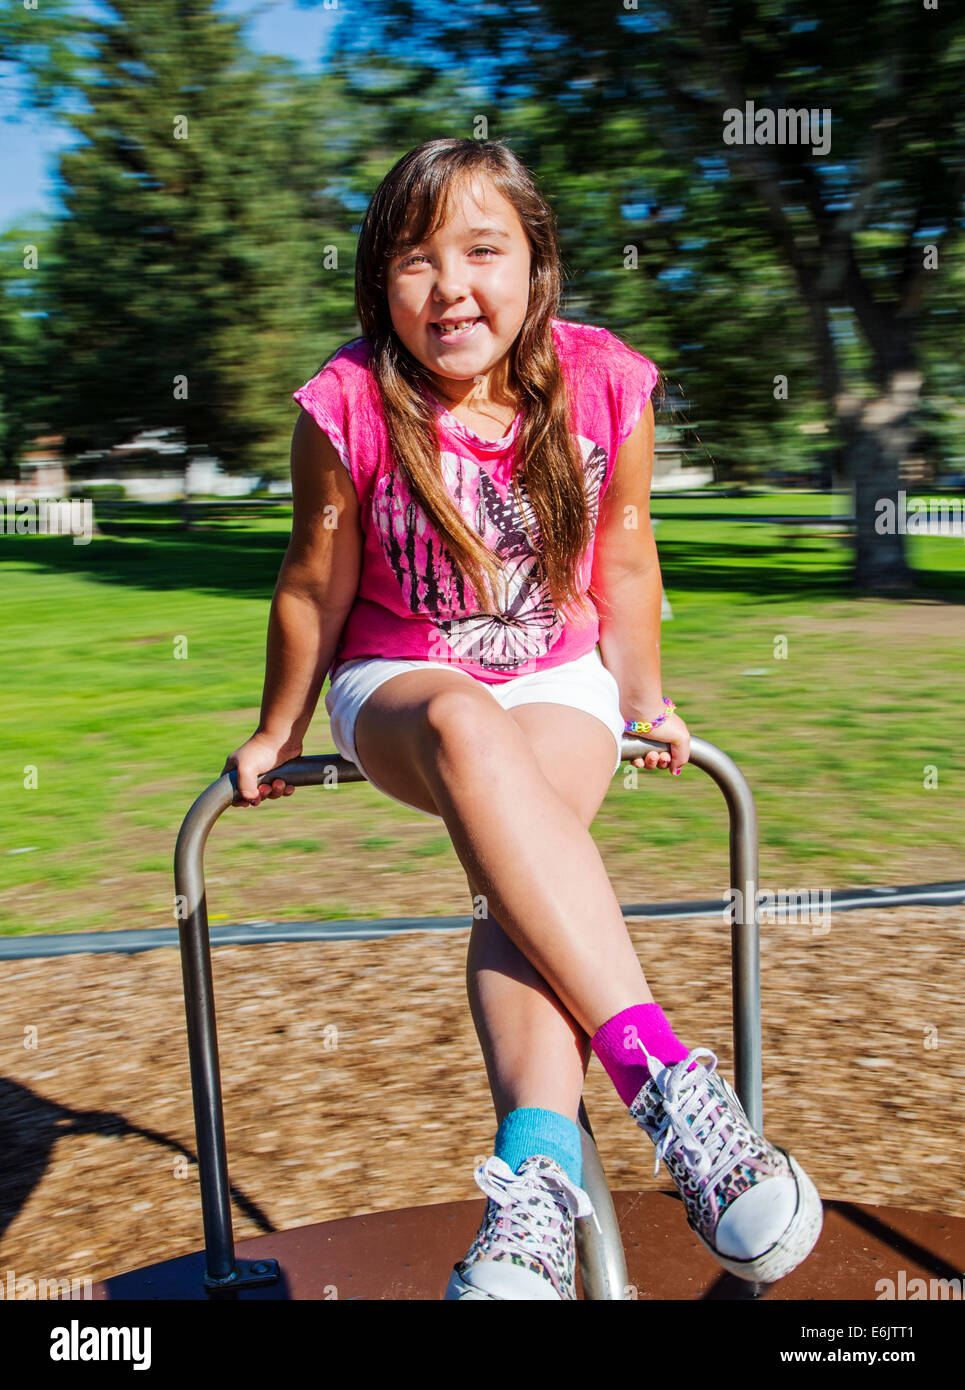 Summer photograph of seven year old girl on a playground merry-go-round Stock Photo